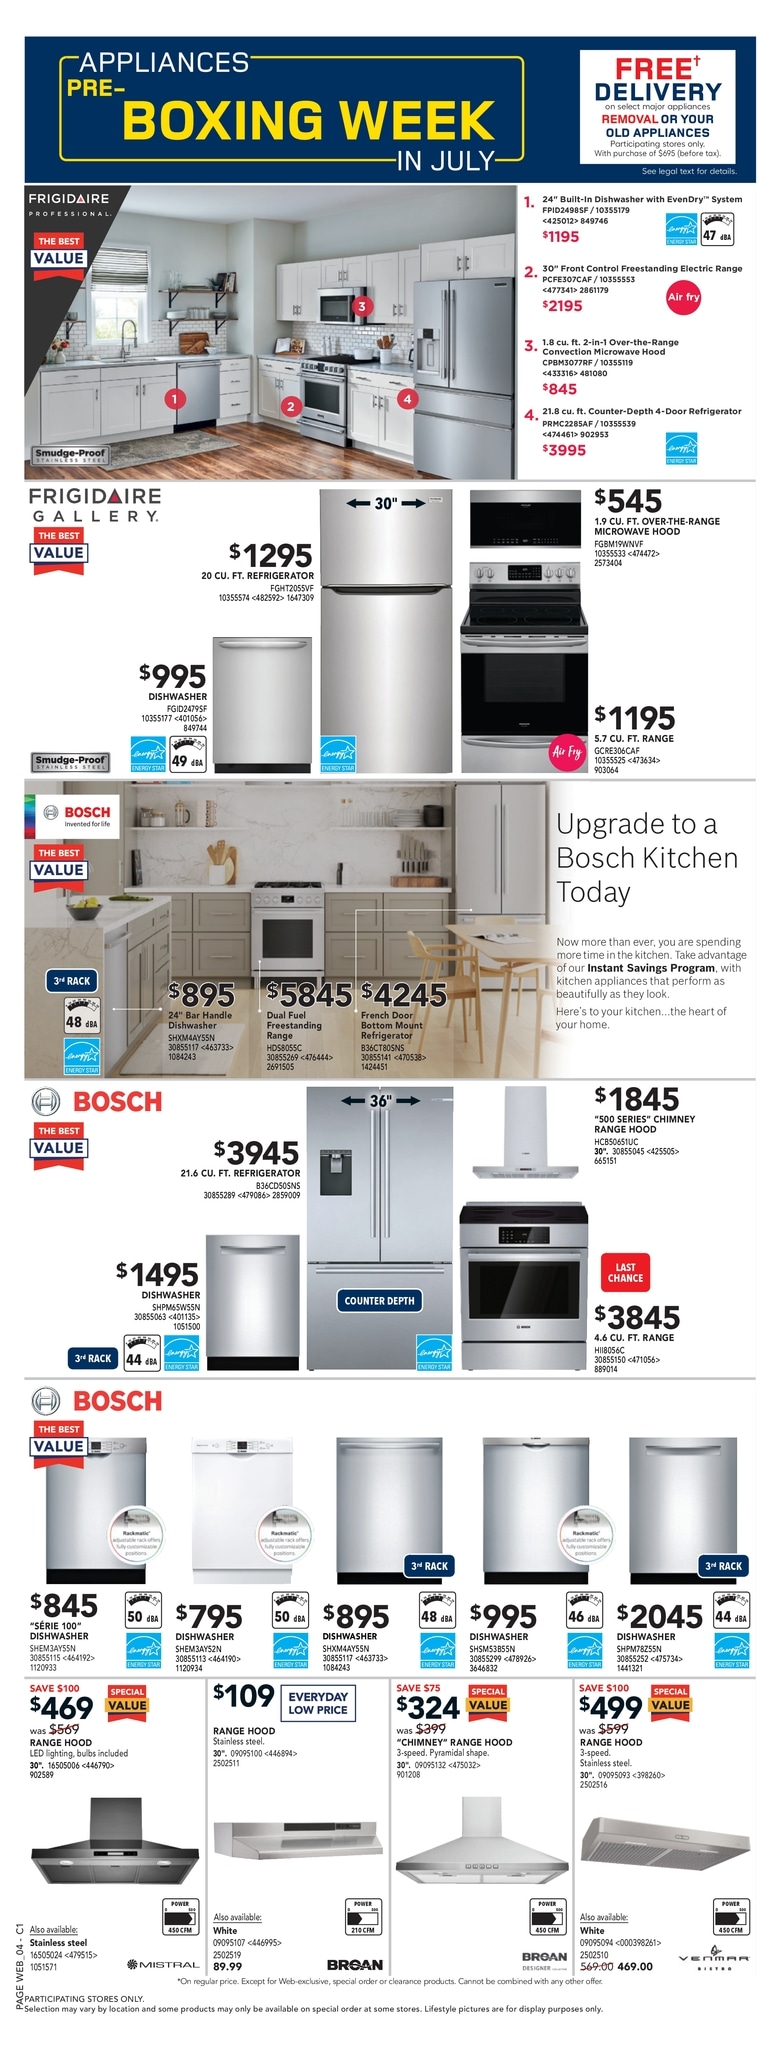 Rona - Weekly Flyer Specials - Page 6